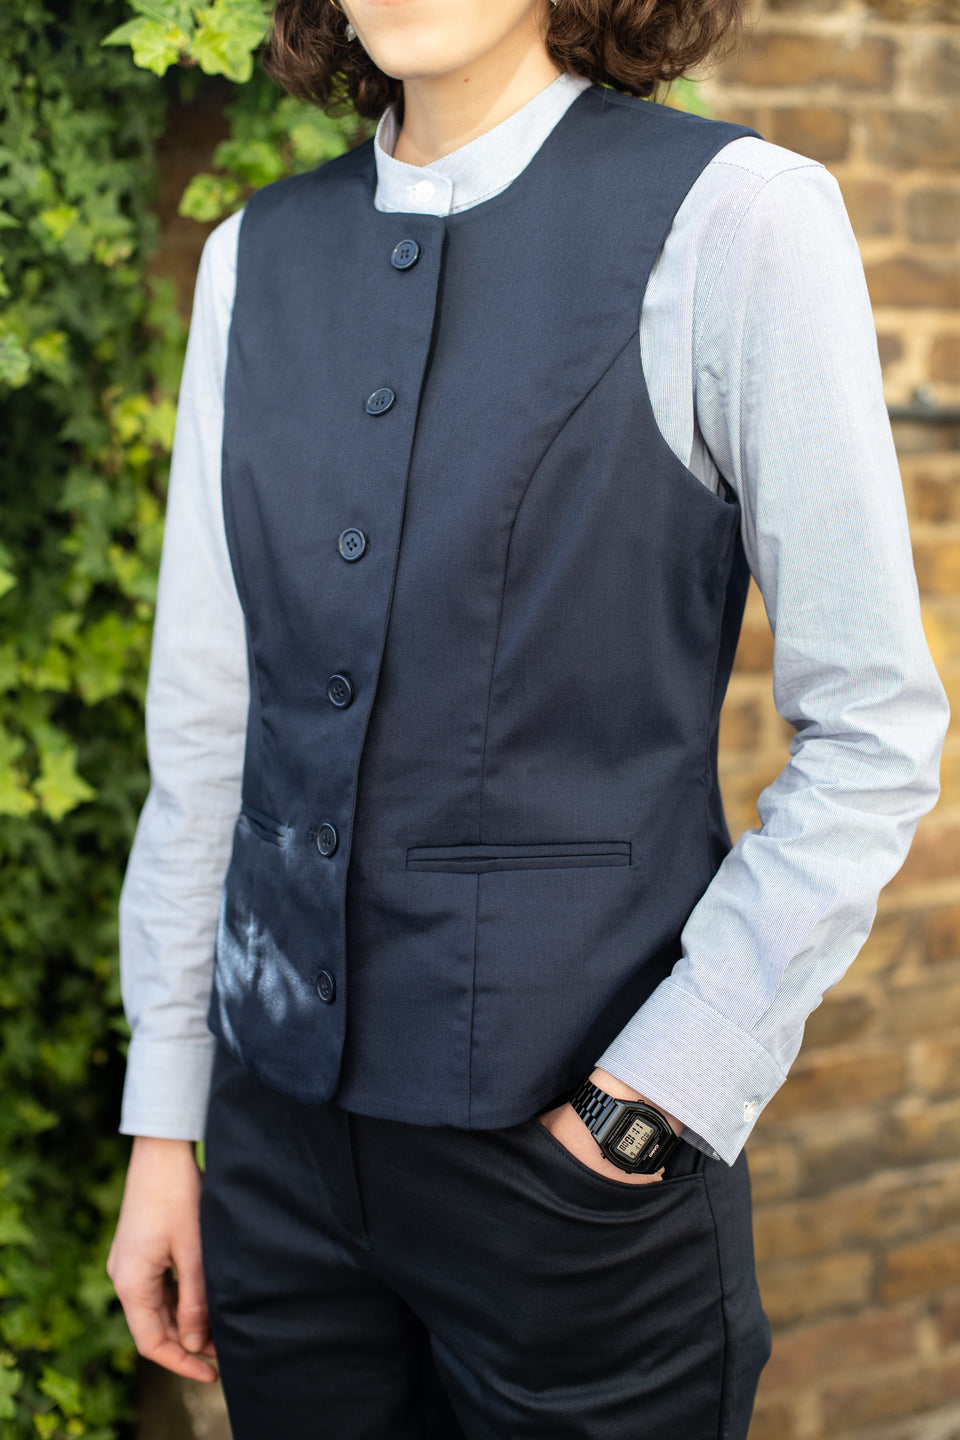 LOT 11: Female Button Up Waistcoat in Navy